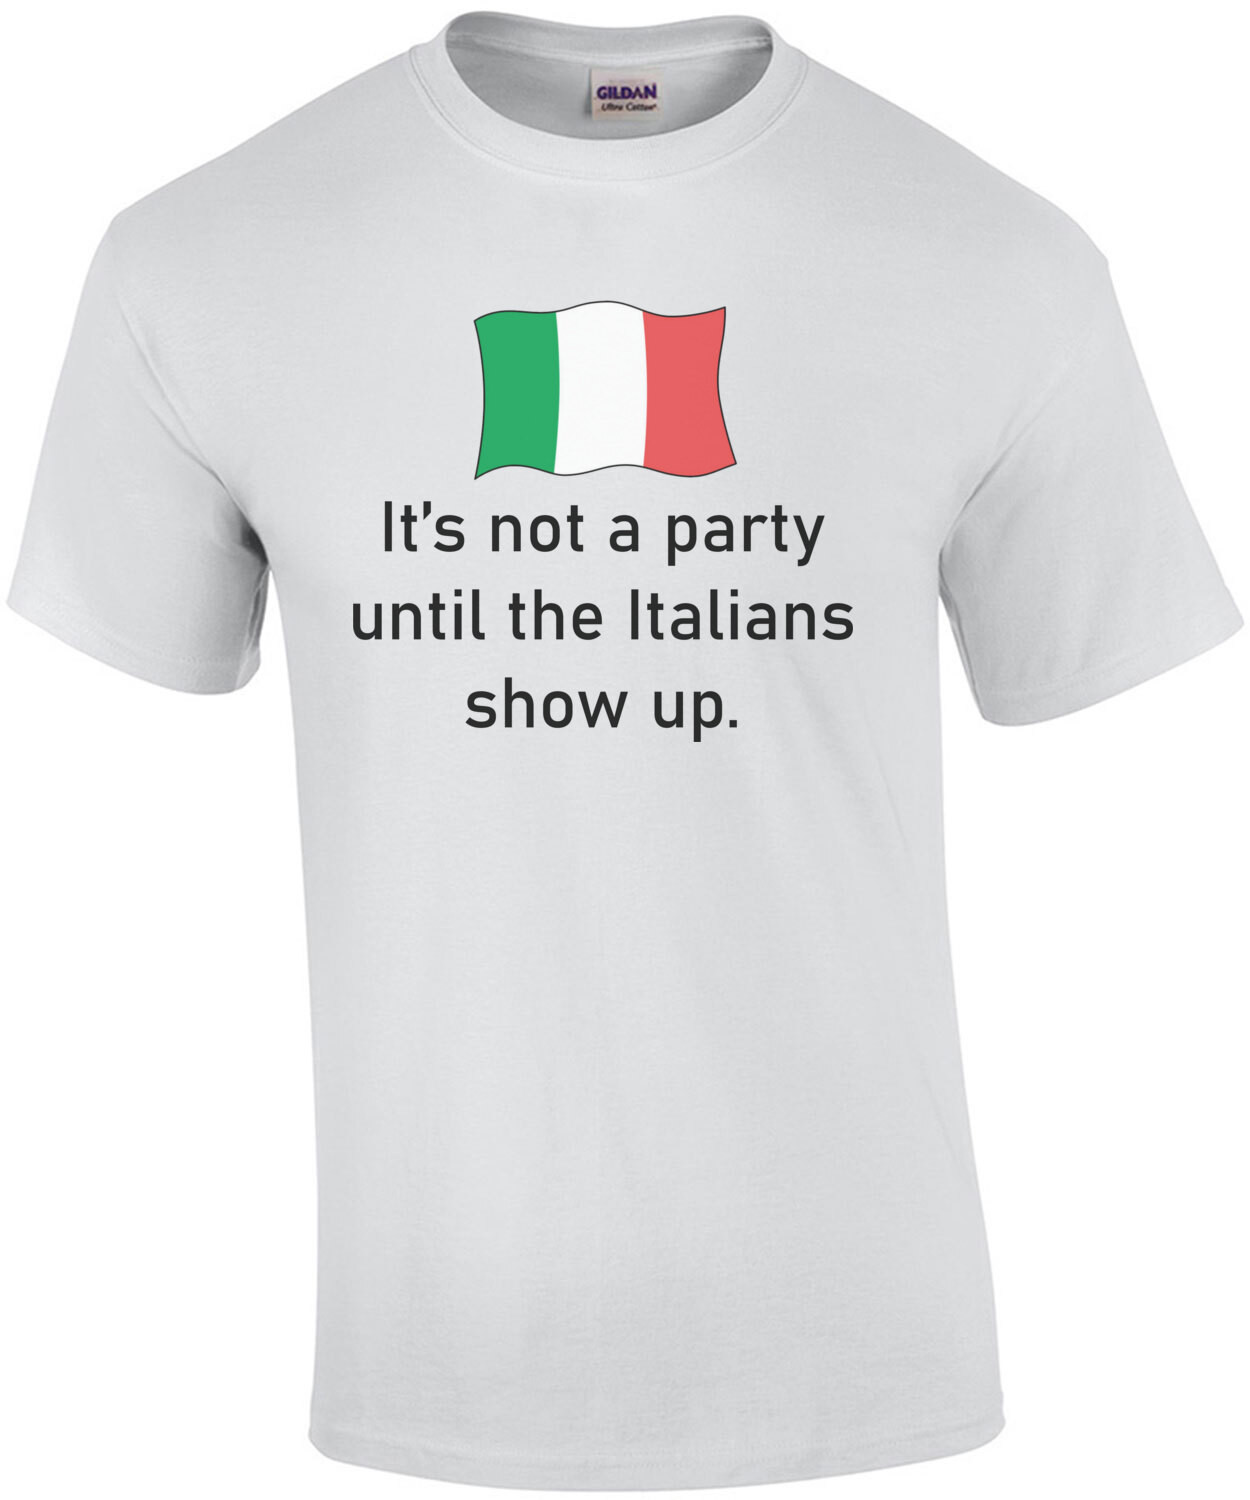 It's not a party until the Italians show up. Funny T-Shirt